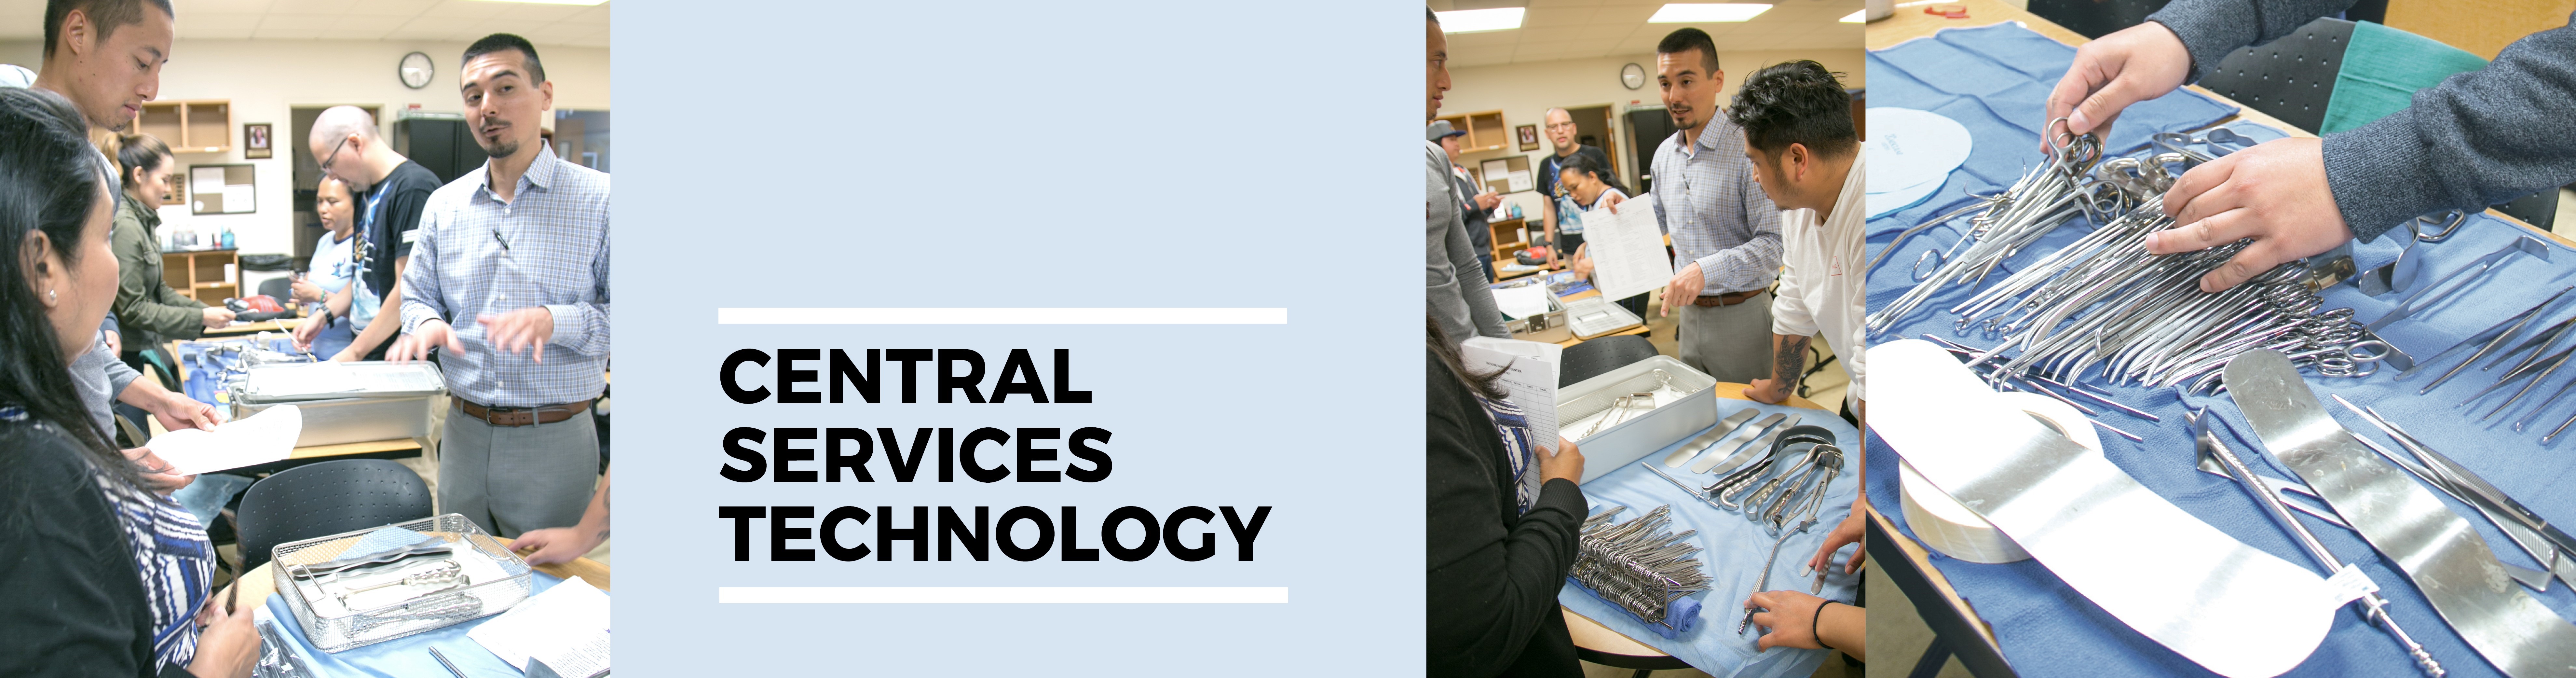 Apply for the Central Services Technology Program at Skyline College